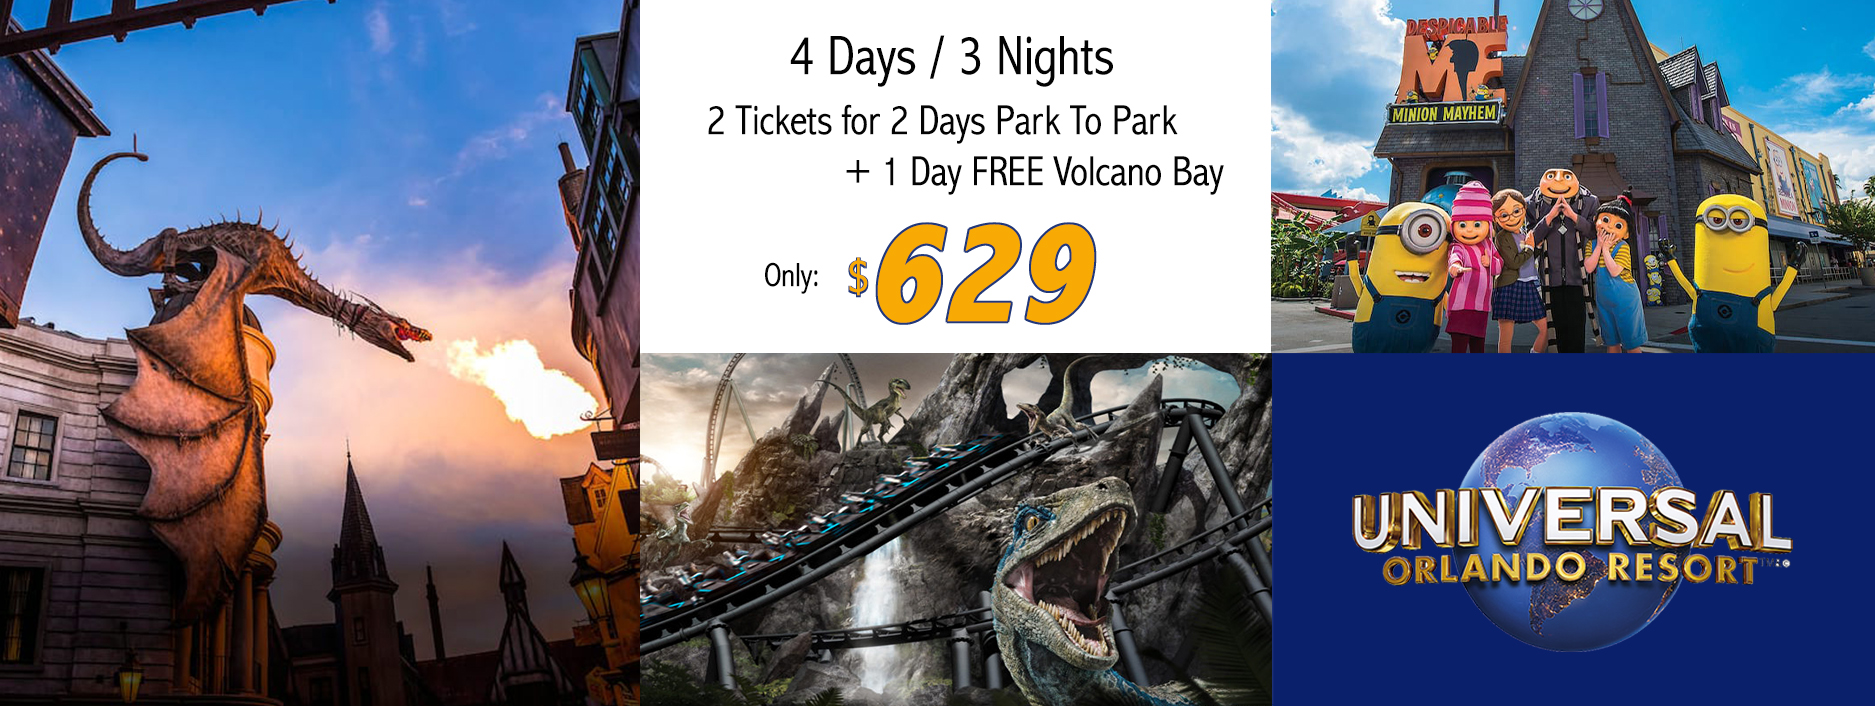 delta universal studios vacation packages